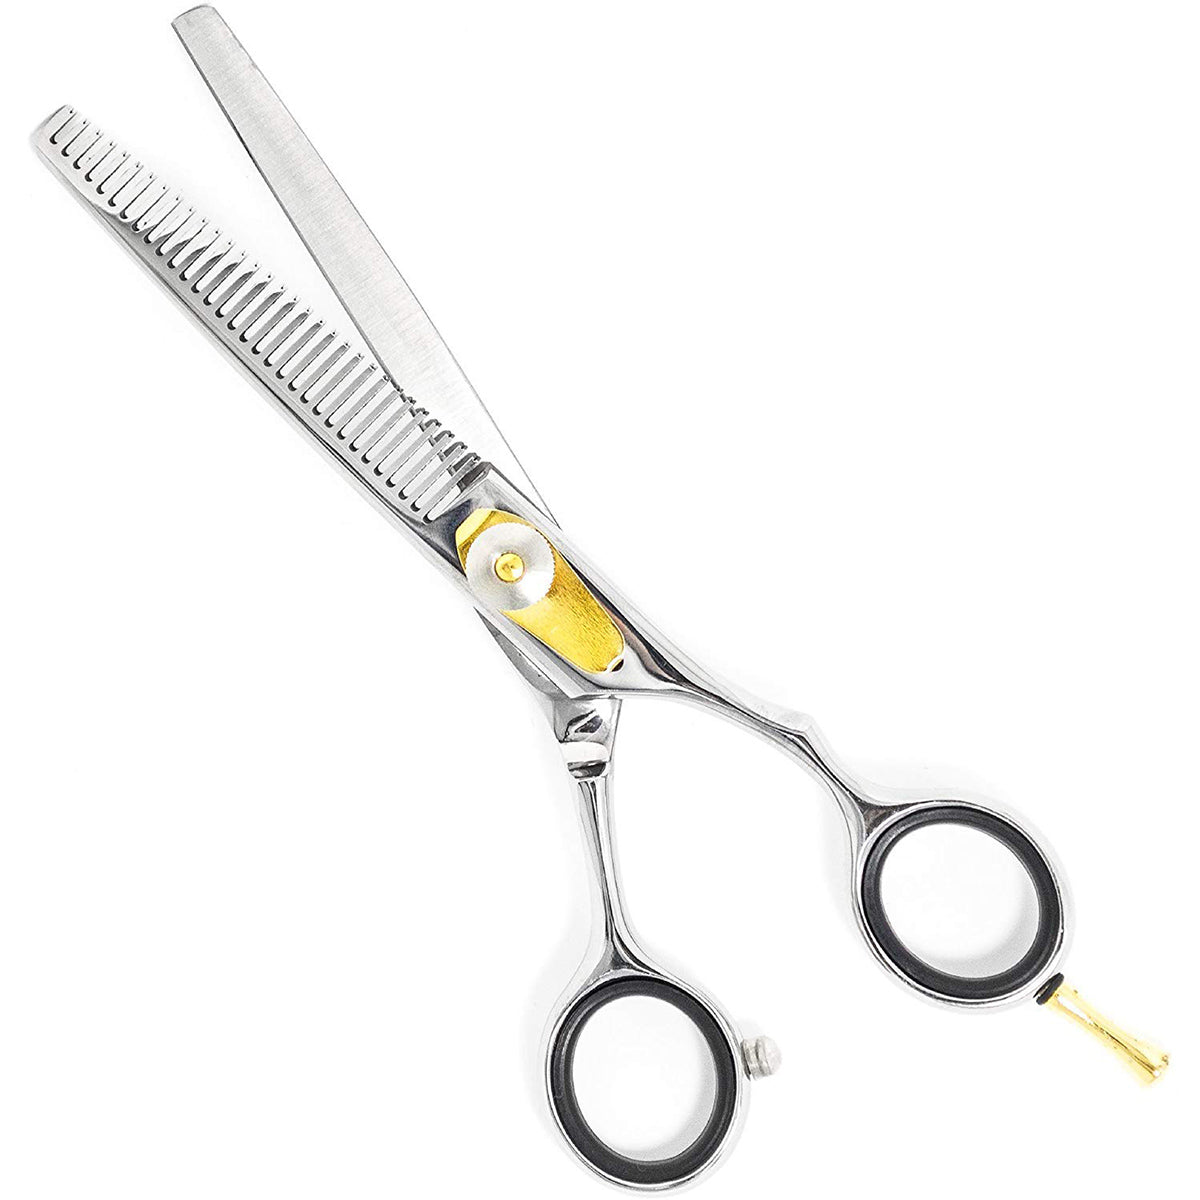 Stainless Steel Hair Wig Cutting Shears & Thinning Scissors Set Cosplay  Accessories Hair Styling